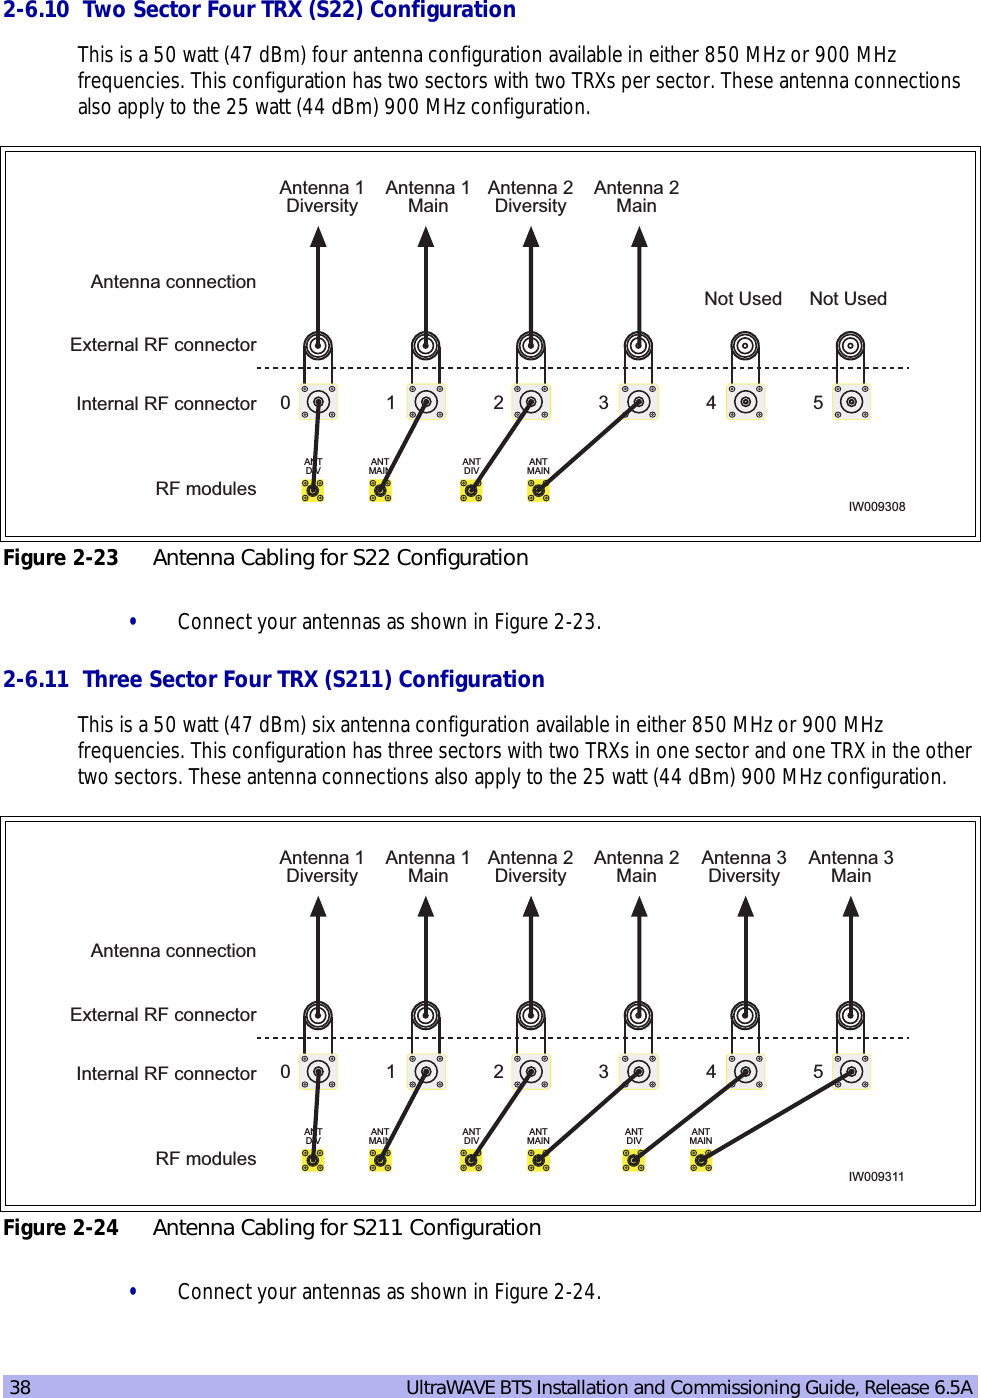 38   UltraWAVE BTS Installation and Commissioning Guide, Release 6.5A2-6.10  Two Sector Four TRX (S22) ConfigurationThis is a 50 watt (47 dBm) four antenna configuration available in either 850 MHz or 900 MHz frequencies. This configuration has two sectors with two TRXs per sector. These antenna connections also apply to the 25 watt (44 dBm) 900 MHz configuration.•Connect your antennas as shown in Figure 2-23.2-6.11  Three Sector Four TRX (S211) ConfigurationThis is a 50 watt (47 dBm) six antenna configuration available in either 850 MHz or 900 MHz frequencies. This configuration has three sectors with two TRXs in one sector and one TRX in the other two sectors. These antenna connections also apply to the 25 watt (44 dBm) 900 MHz configuration.•Connect your antennas as shown in Figure 2-24.Figure 2-23 Antenna Cabling for S22 ConfigurationFigure 2-24 Antenna Cabling for S211 ConfigurationANTDIVANTMAINANTDIVANTMAINRF modulesIW009308Internal RF connectorExternal RF connectorAntenna 1DiversityAntenna connection1 2 3 4 50Not Used Not UsedAntenna 1MainAntenna 2MainAntenna 2DiversityANTDIVANTMAINANTDIVANTMAINRF modulesIW009311Internal RF connectorExternal RF connectorAntenna 1DiversityAntenna connection1 2 3 4 50Antenna 1MainAntenna 2MainAntenna 2DiversityANTDIVANTMAINAntenna 3MainAntenna 3Diversity